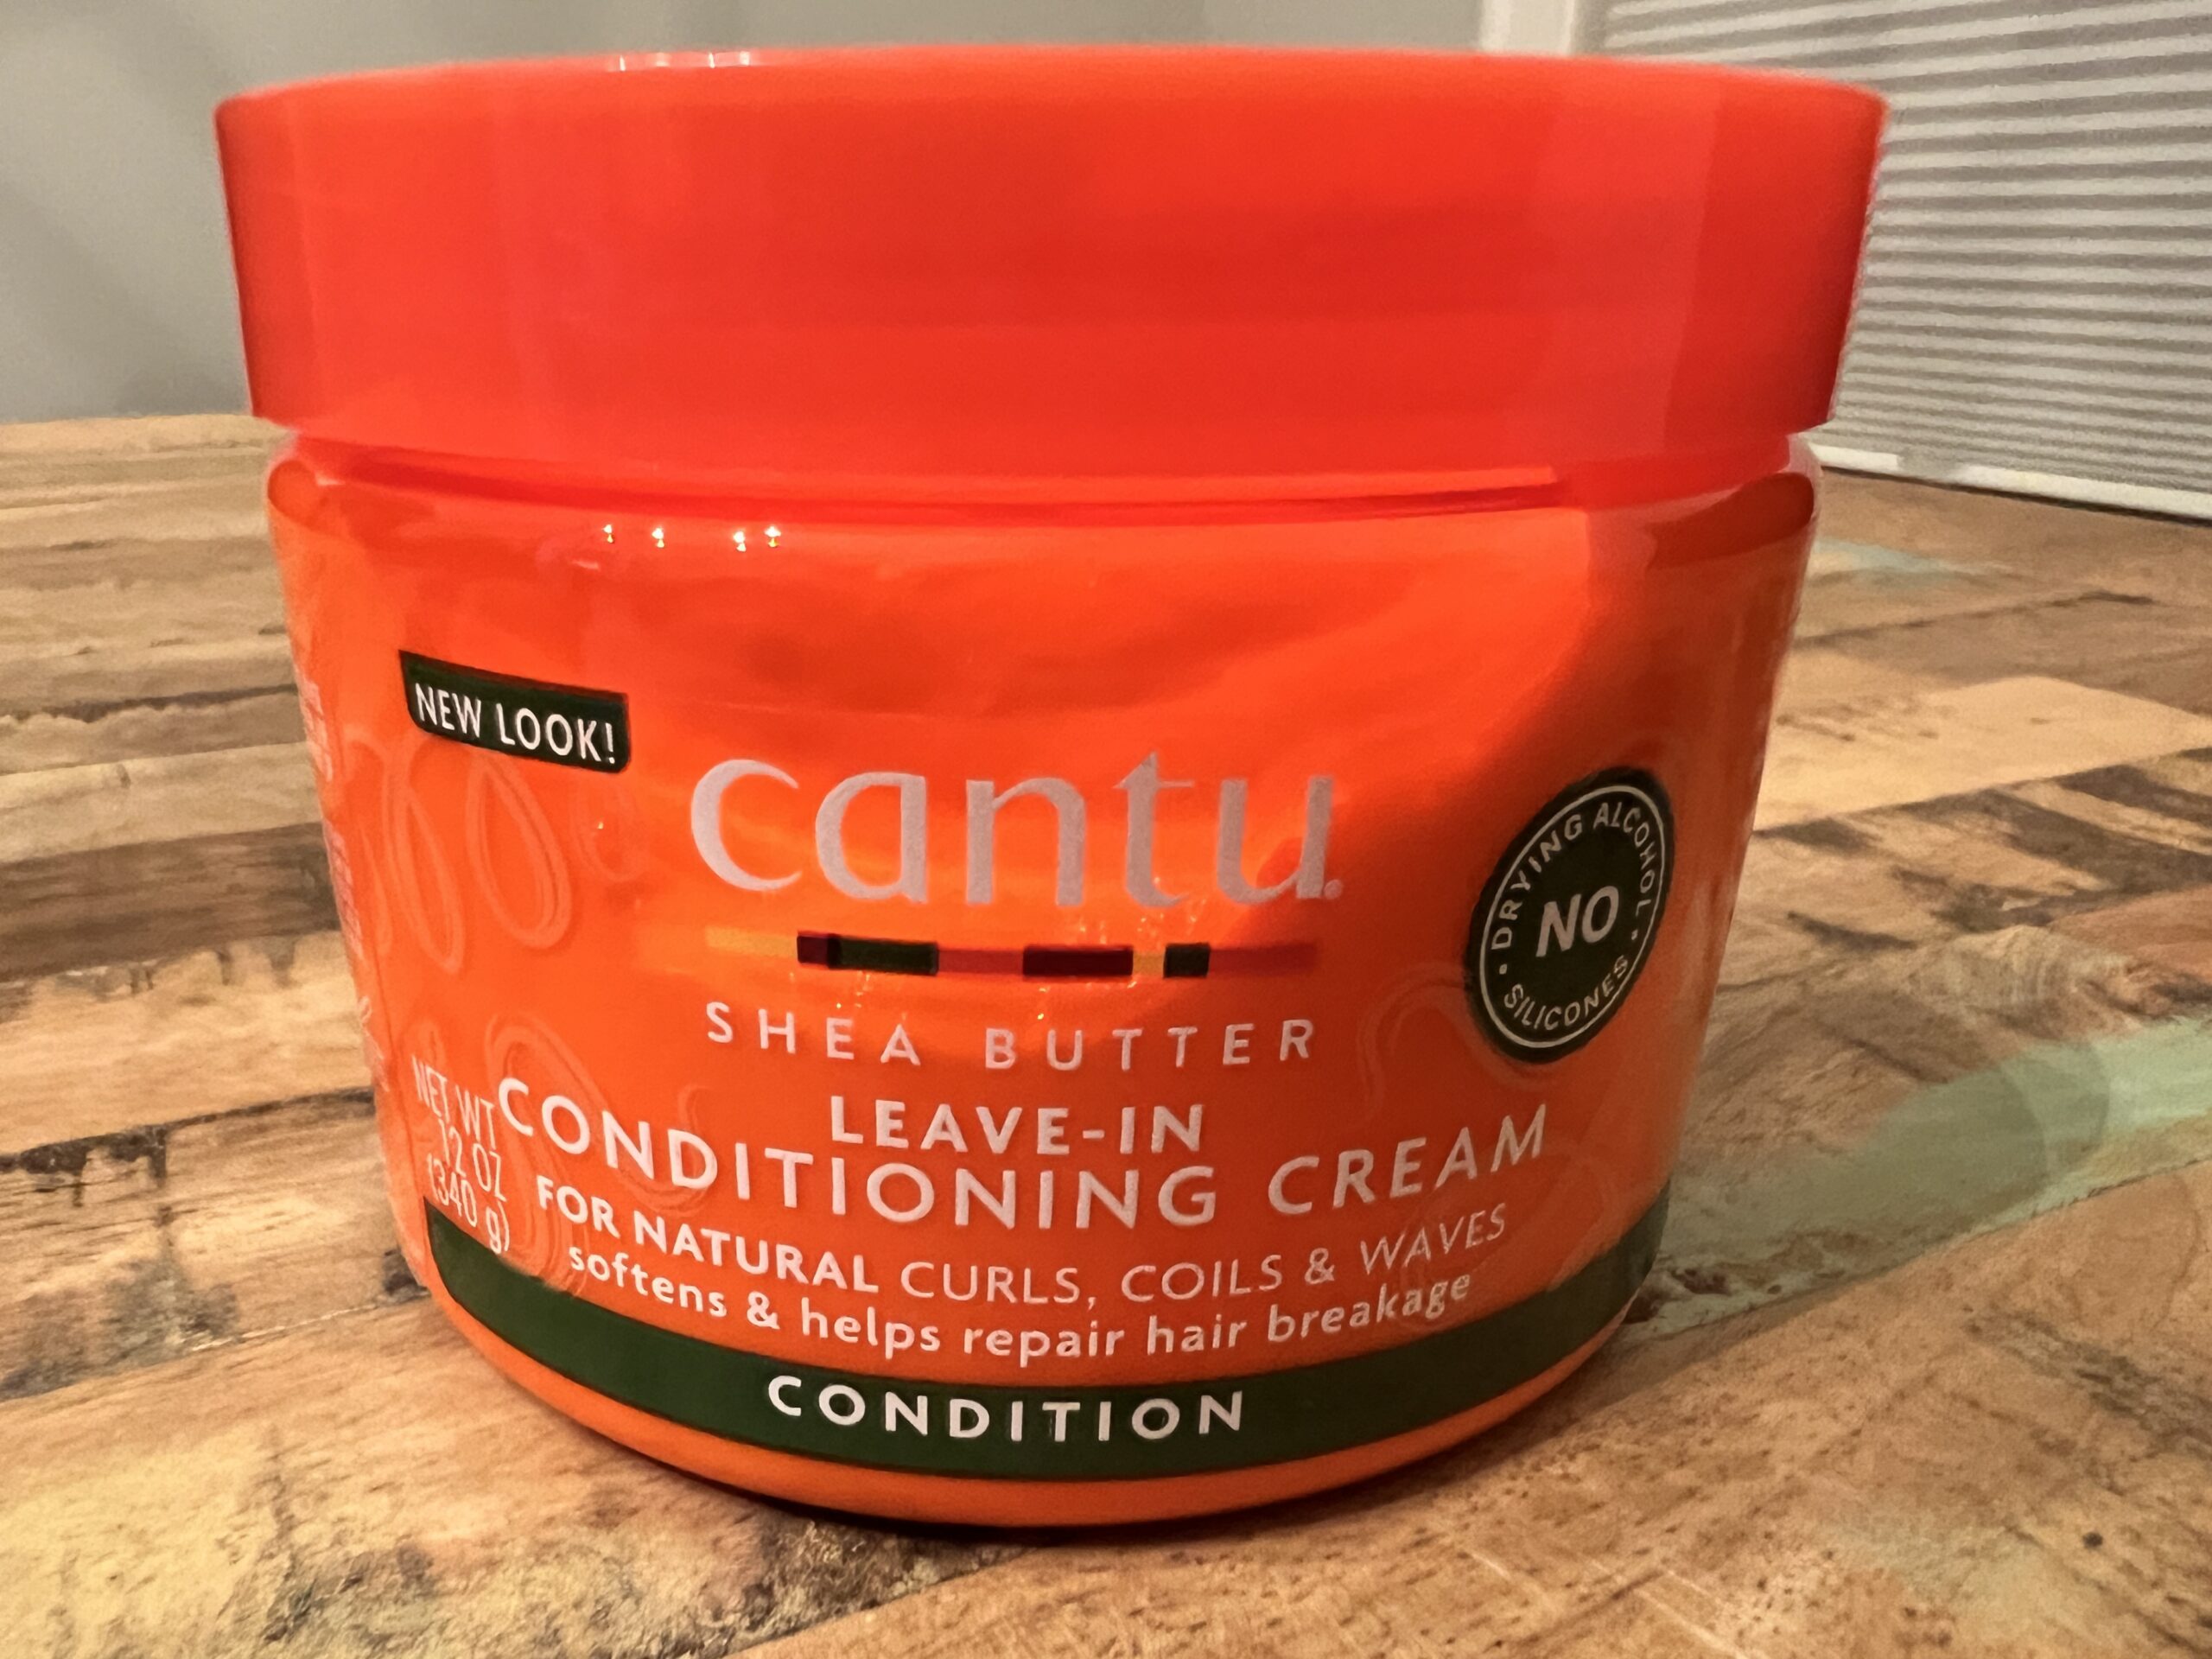 Cantu Shea Butter Leave-In Conditioning Cream bottle, designed to soften and reduce hair breakage.